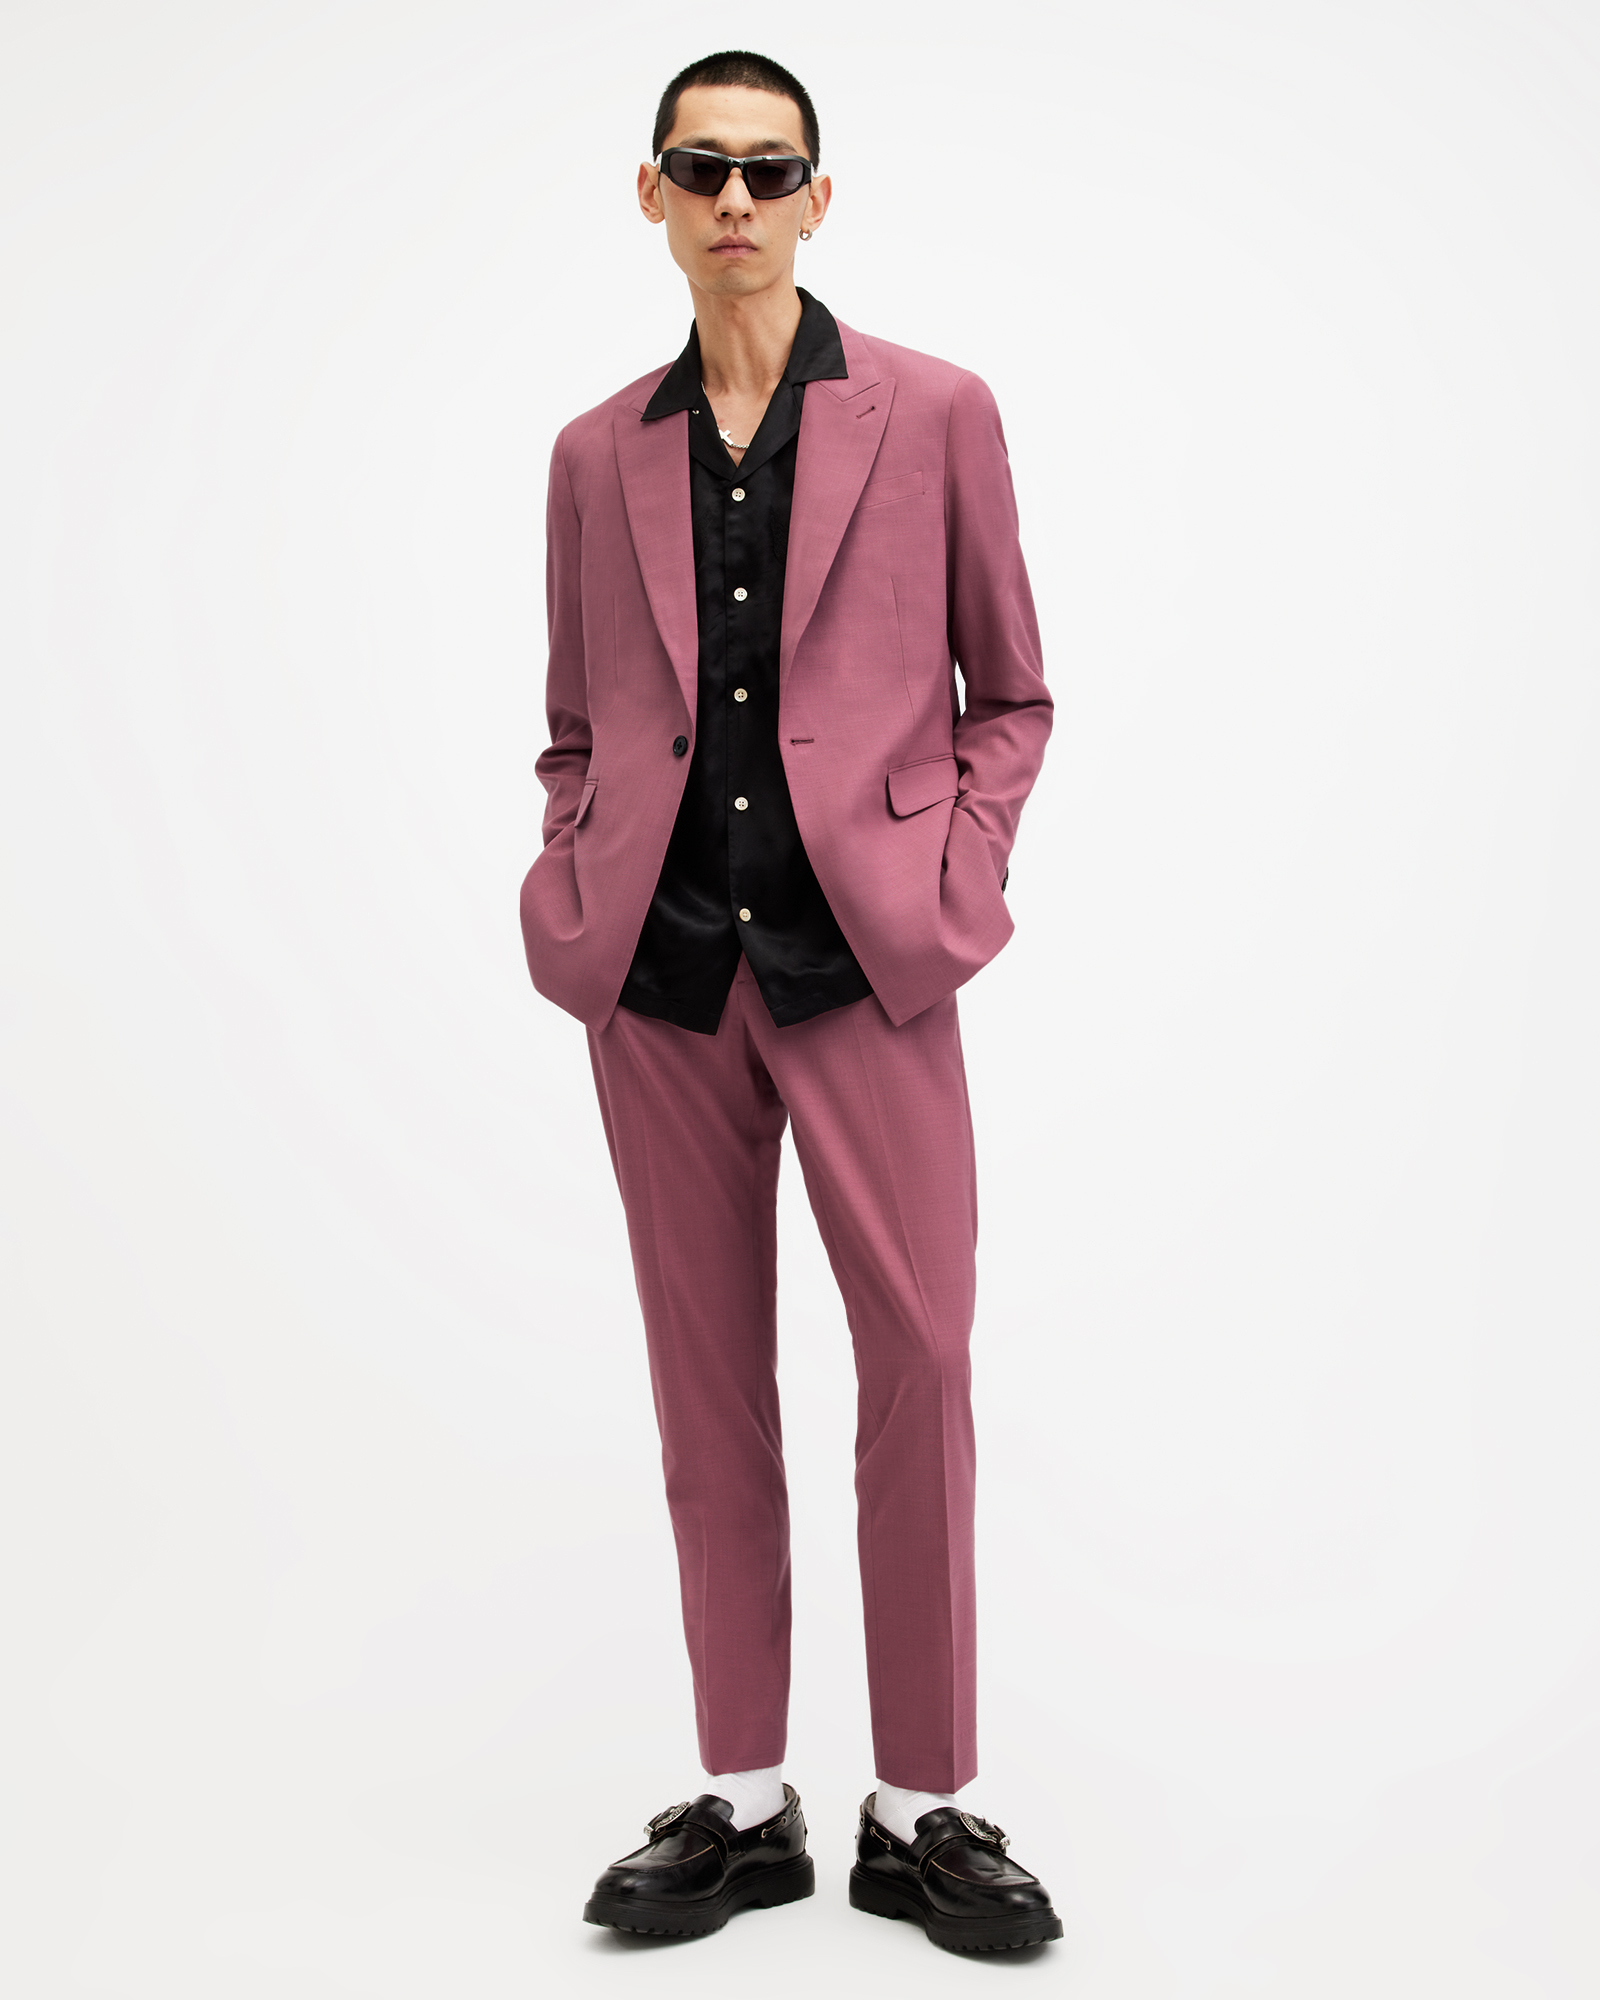 AllSaints Aura Skinny Fit Stretch Trousers,, Pink